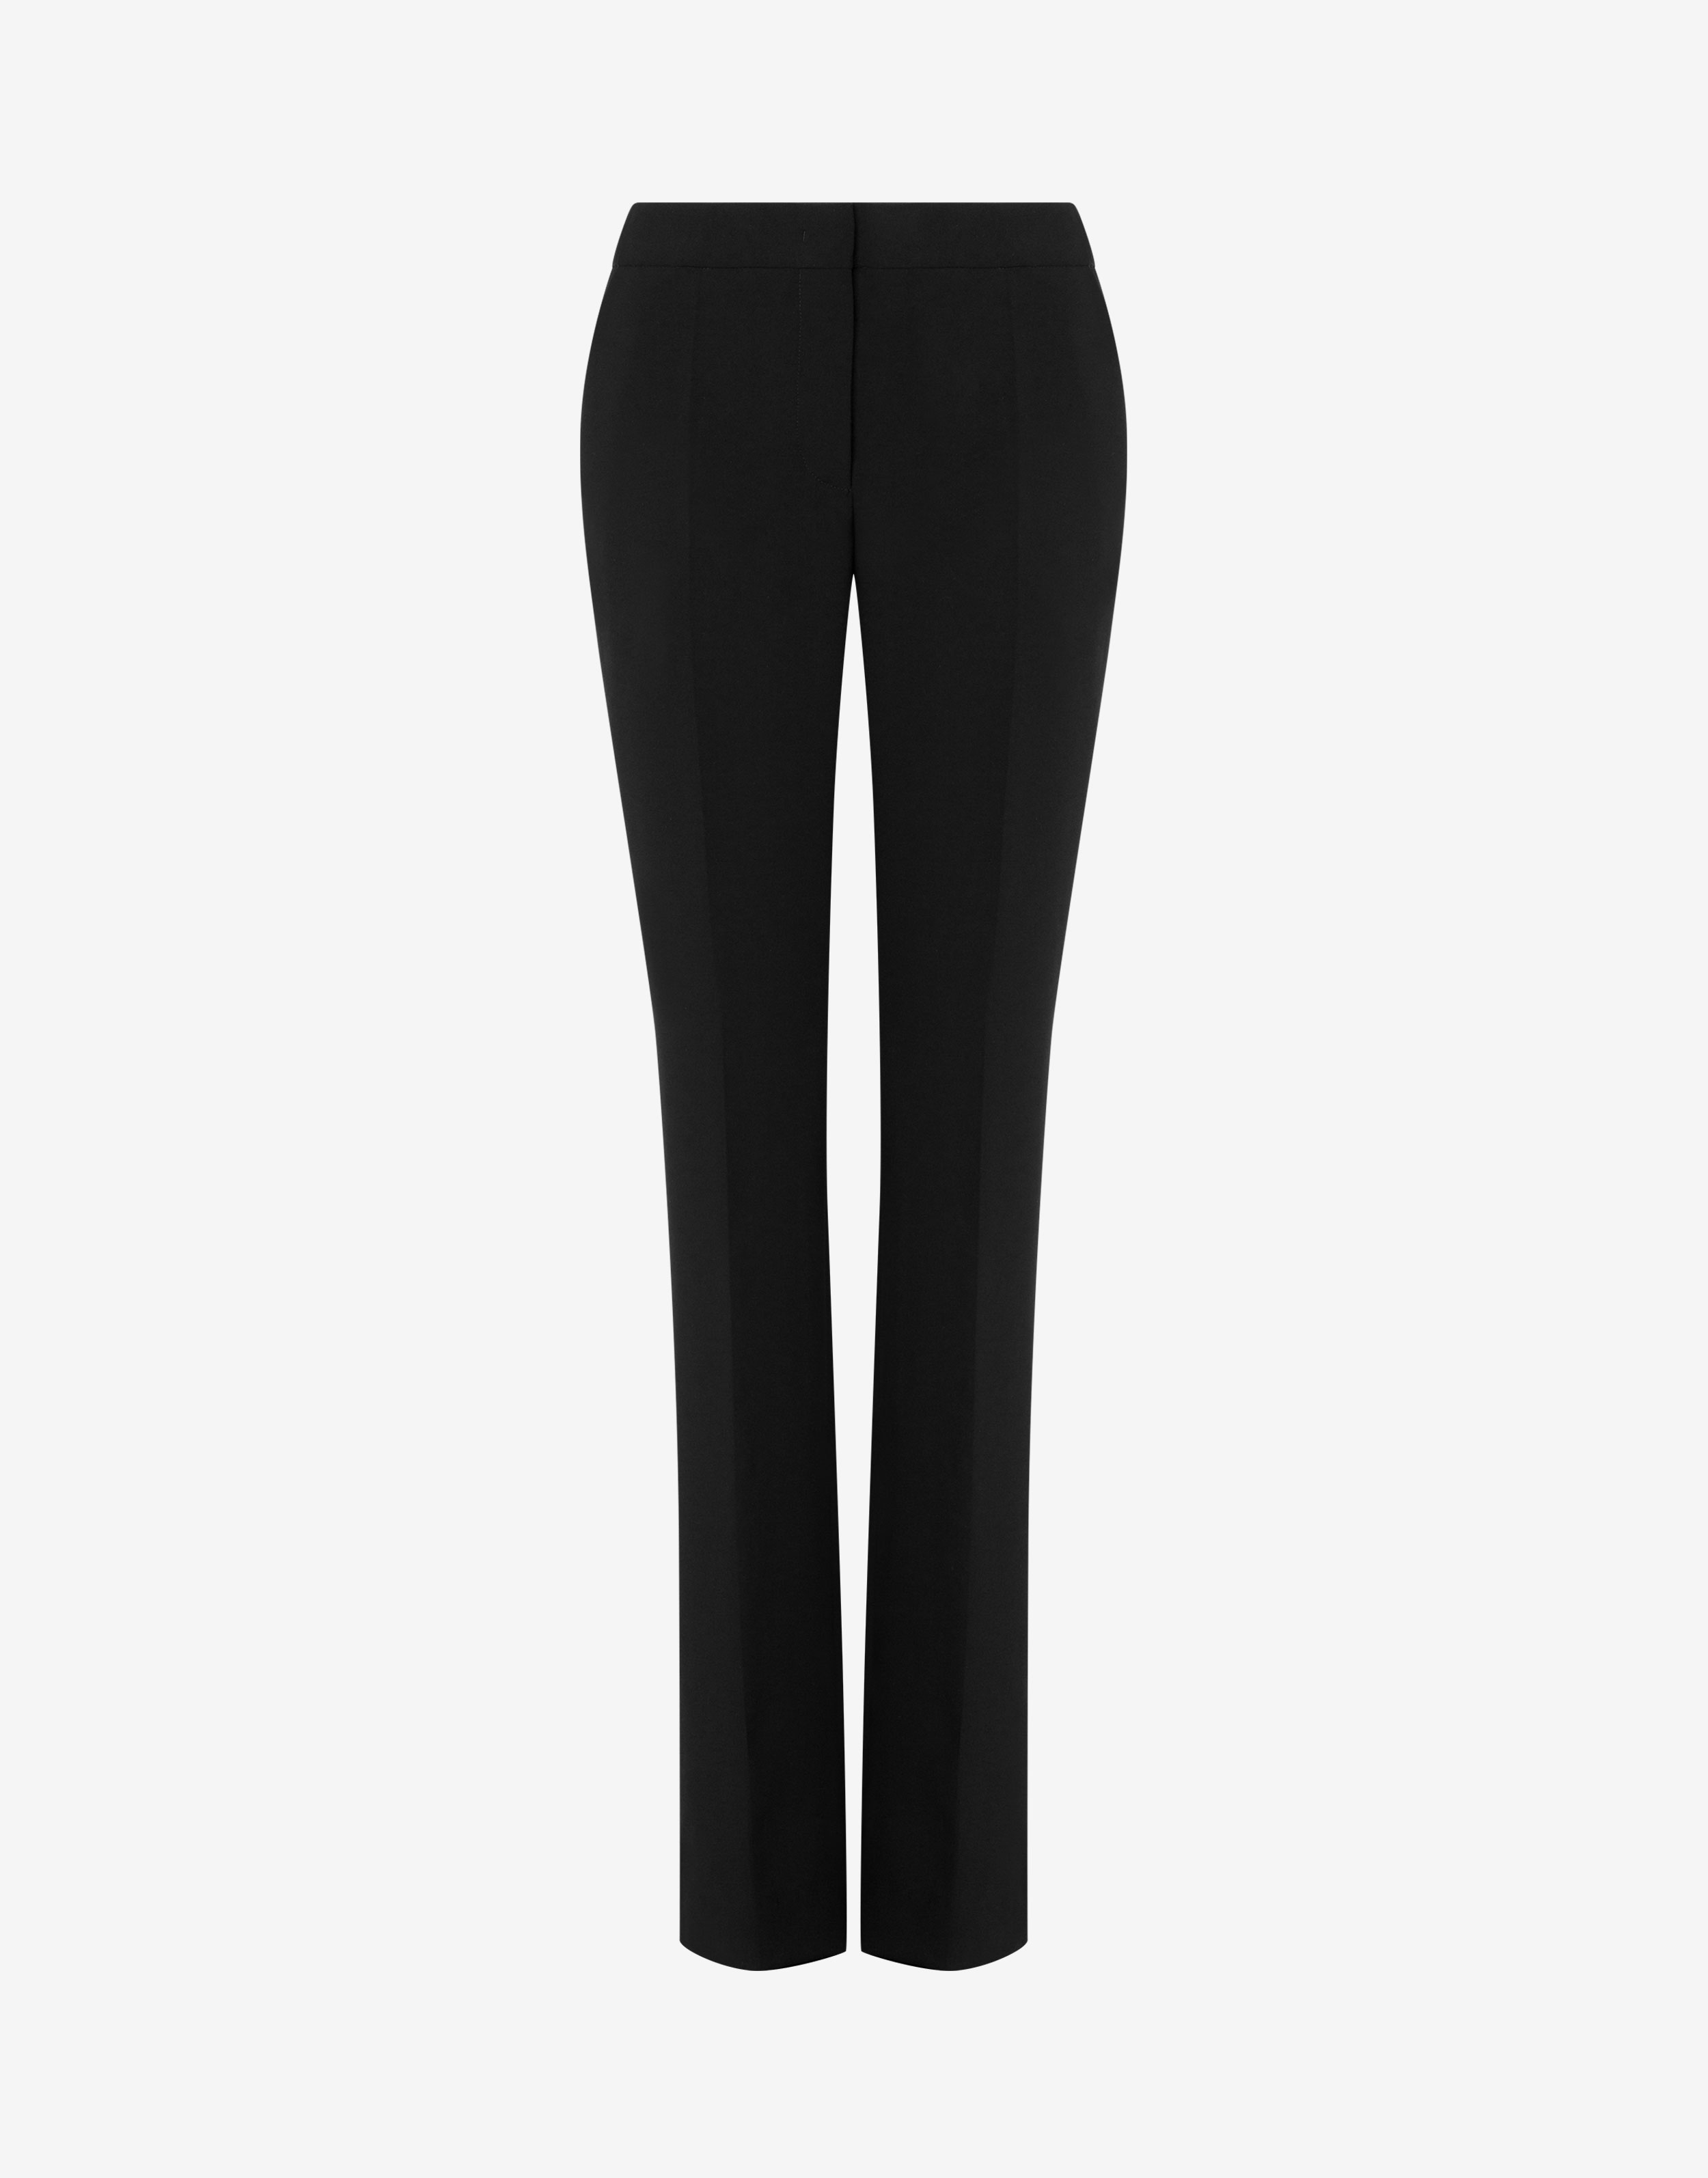 Women's Tuxedo Trousers | Regular & Slim Fit Trousers | Next Official Site